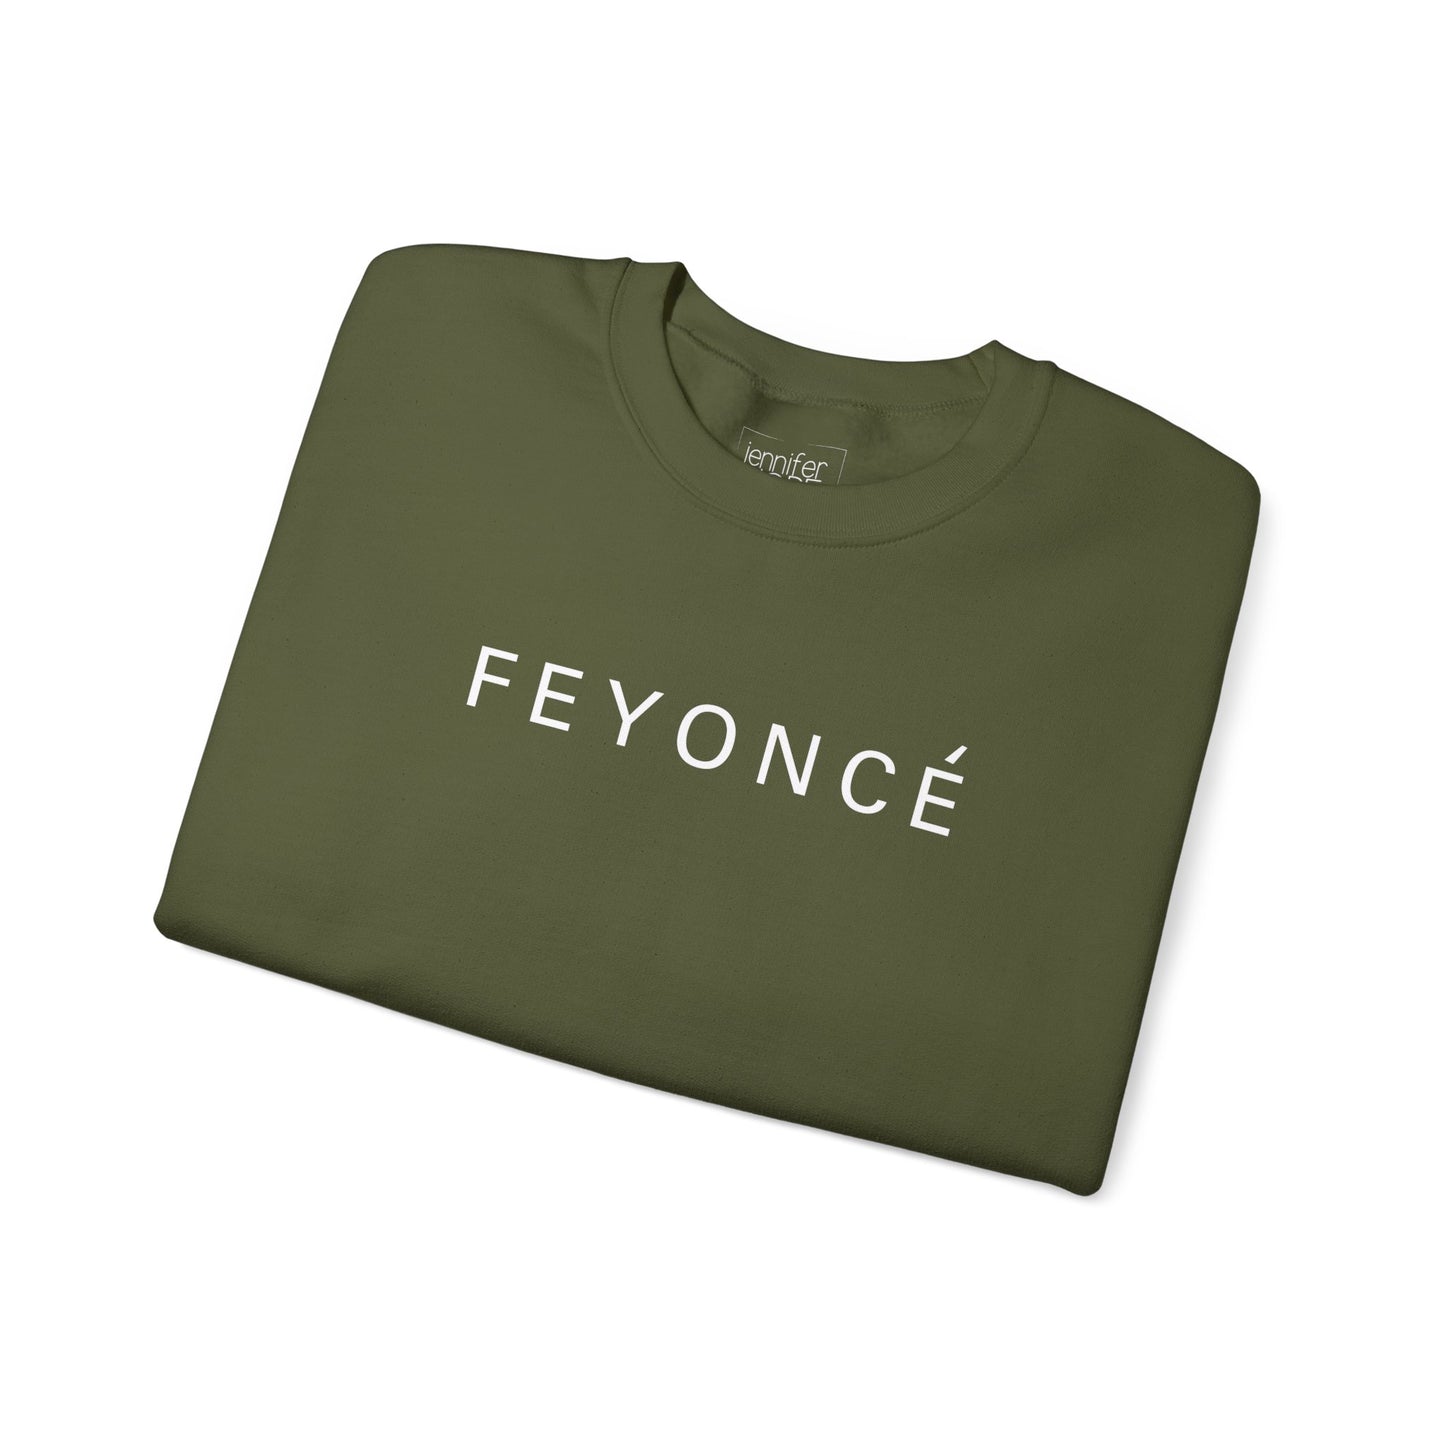 Feyonce' Crewneck Customizable Bridal Sweatshirt Personalize it with your new Last name on the back.